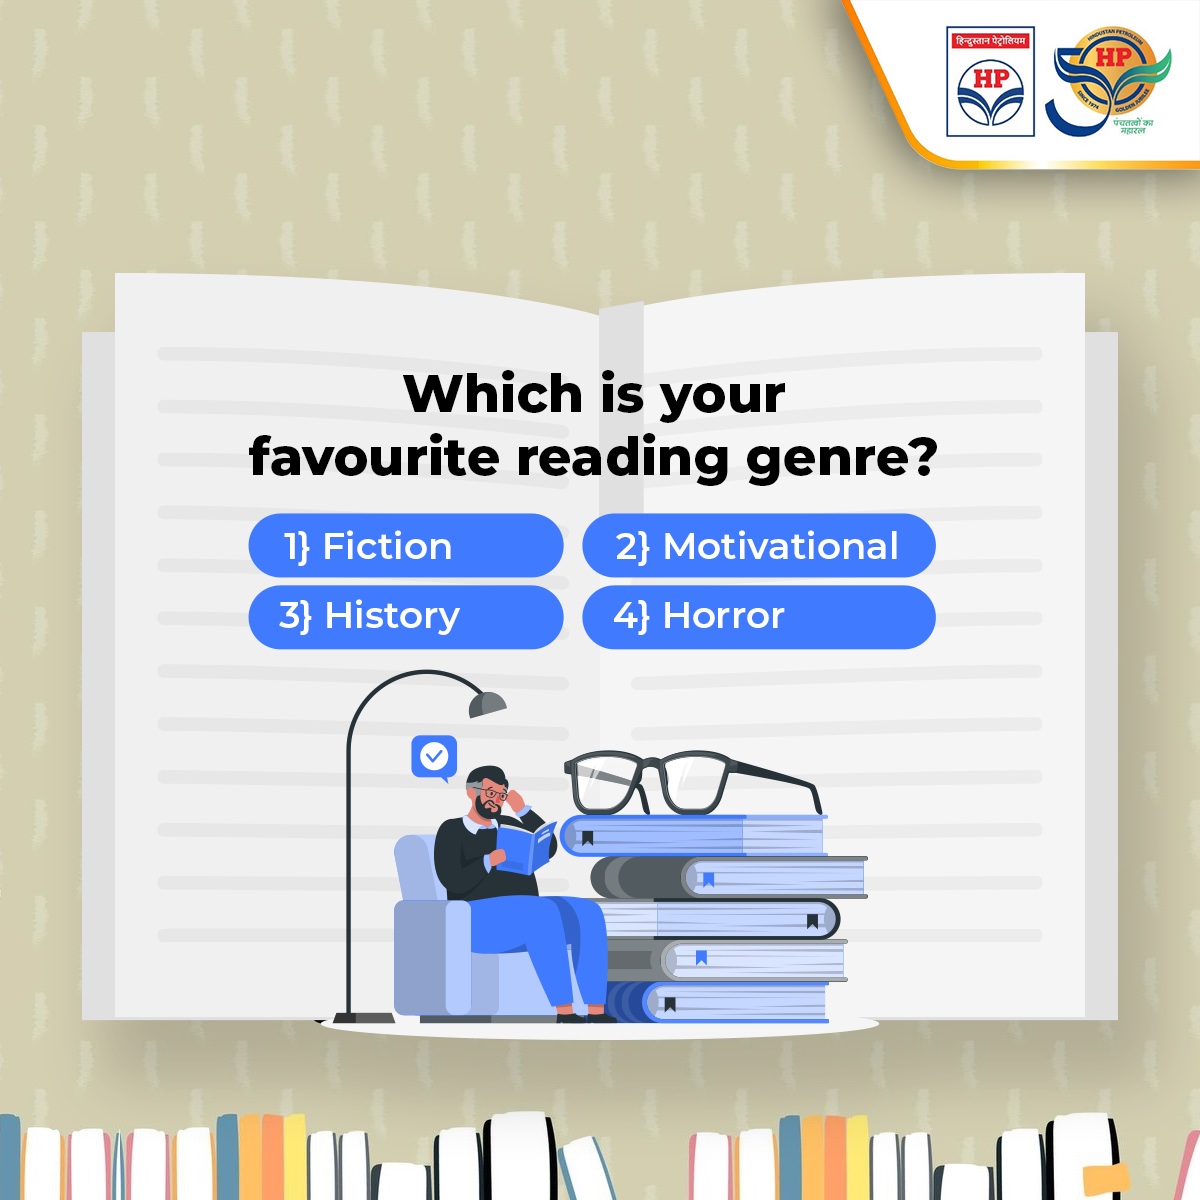 We just celebrated World Book and Copyright Day last month. As an avid reader, what do you first look for, while choosing a book? Mention your answer in the comment section below and don’t forget to tag your friends too.

#Quiz #HPTowardsGoldenHorizon #HPCL #DeliveringHappiness